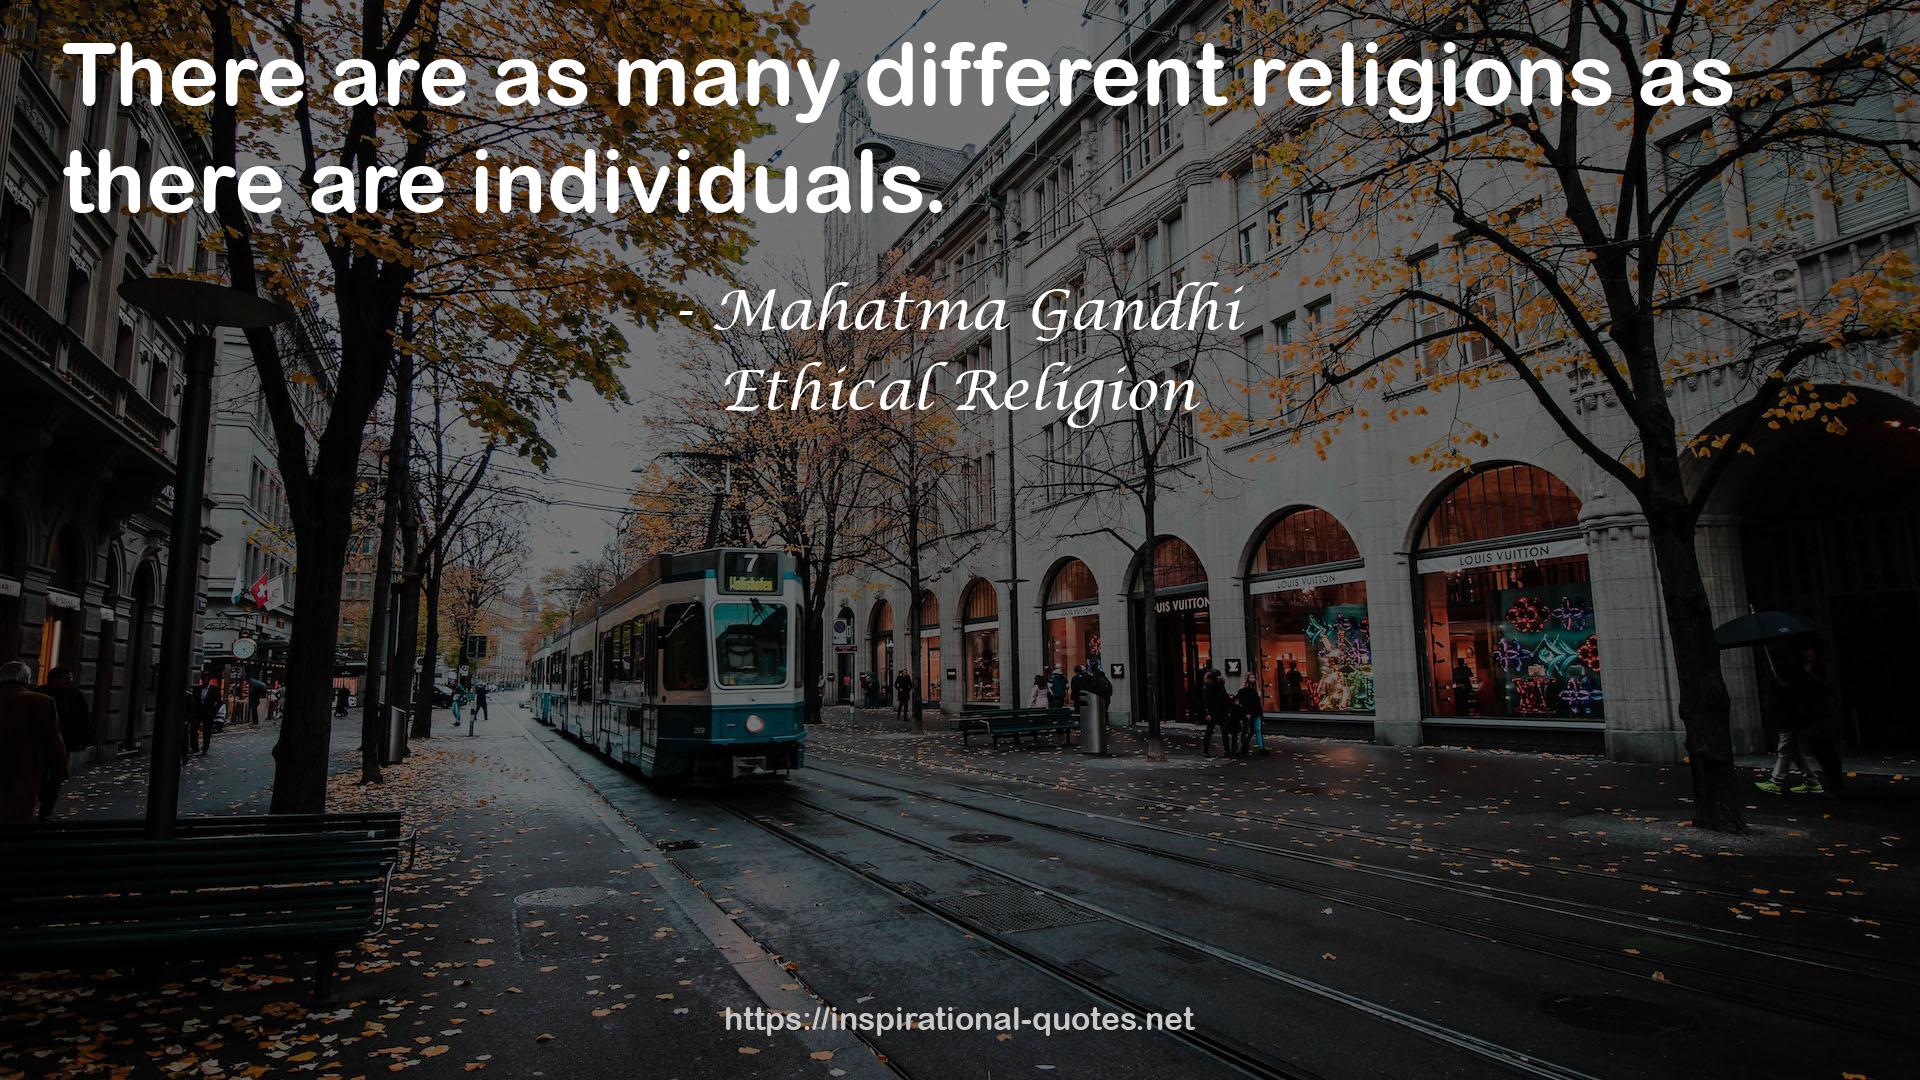 Ethical Religion QUOTES